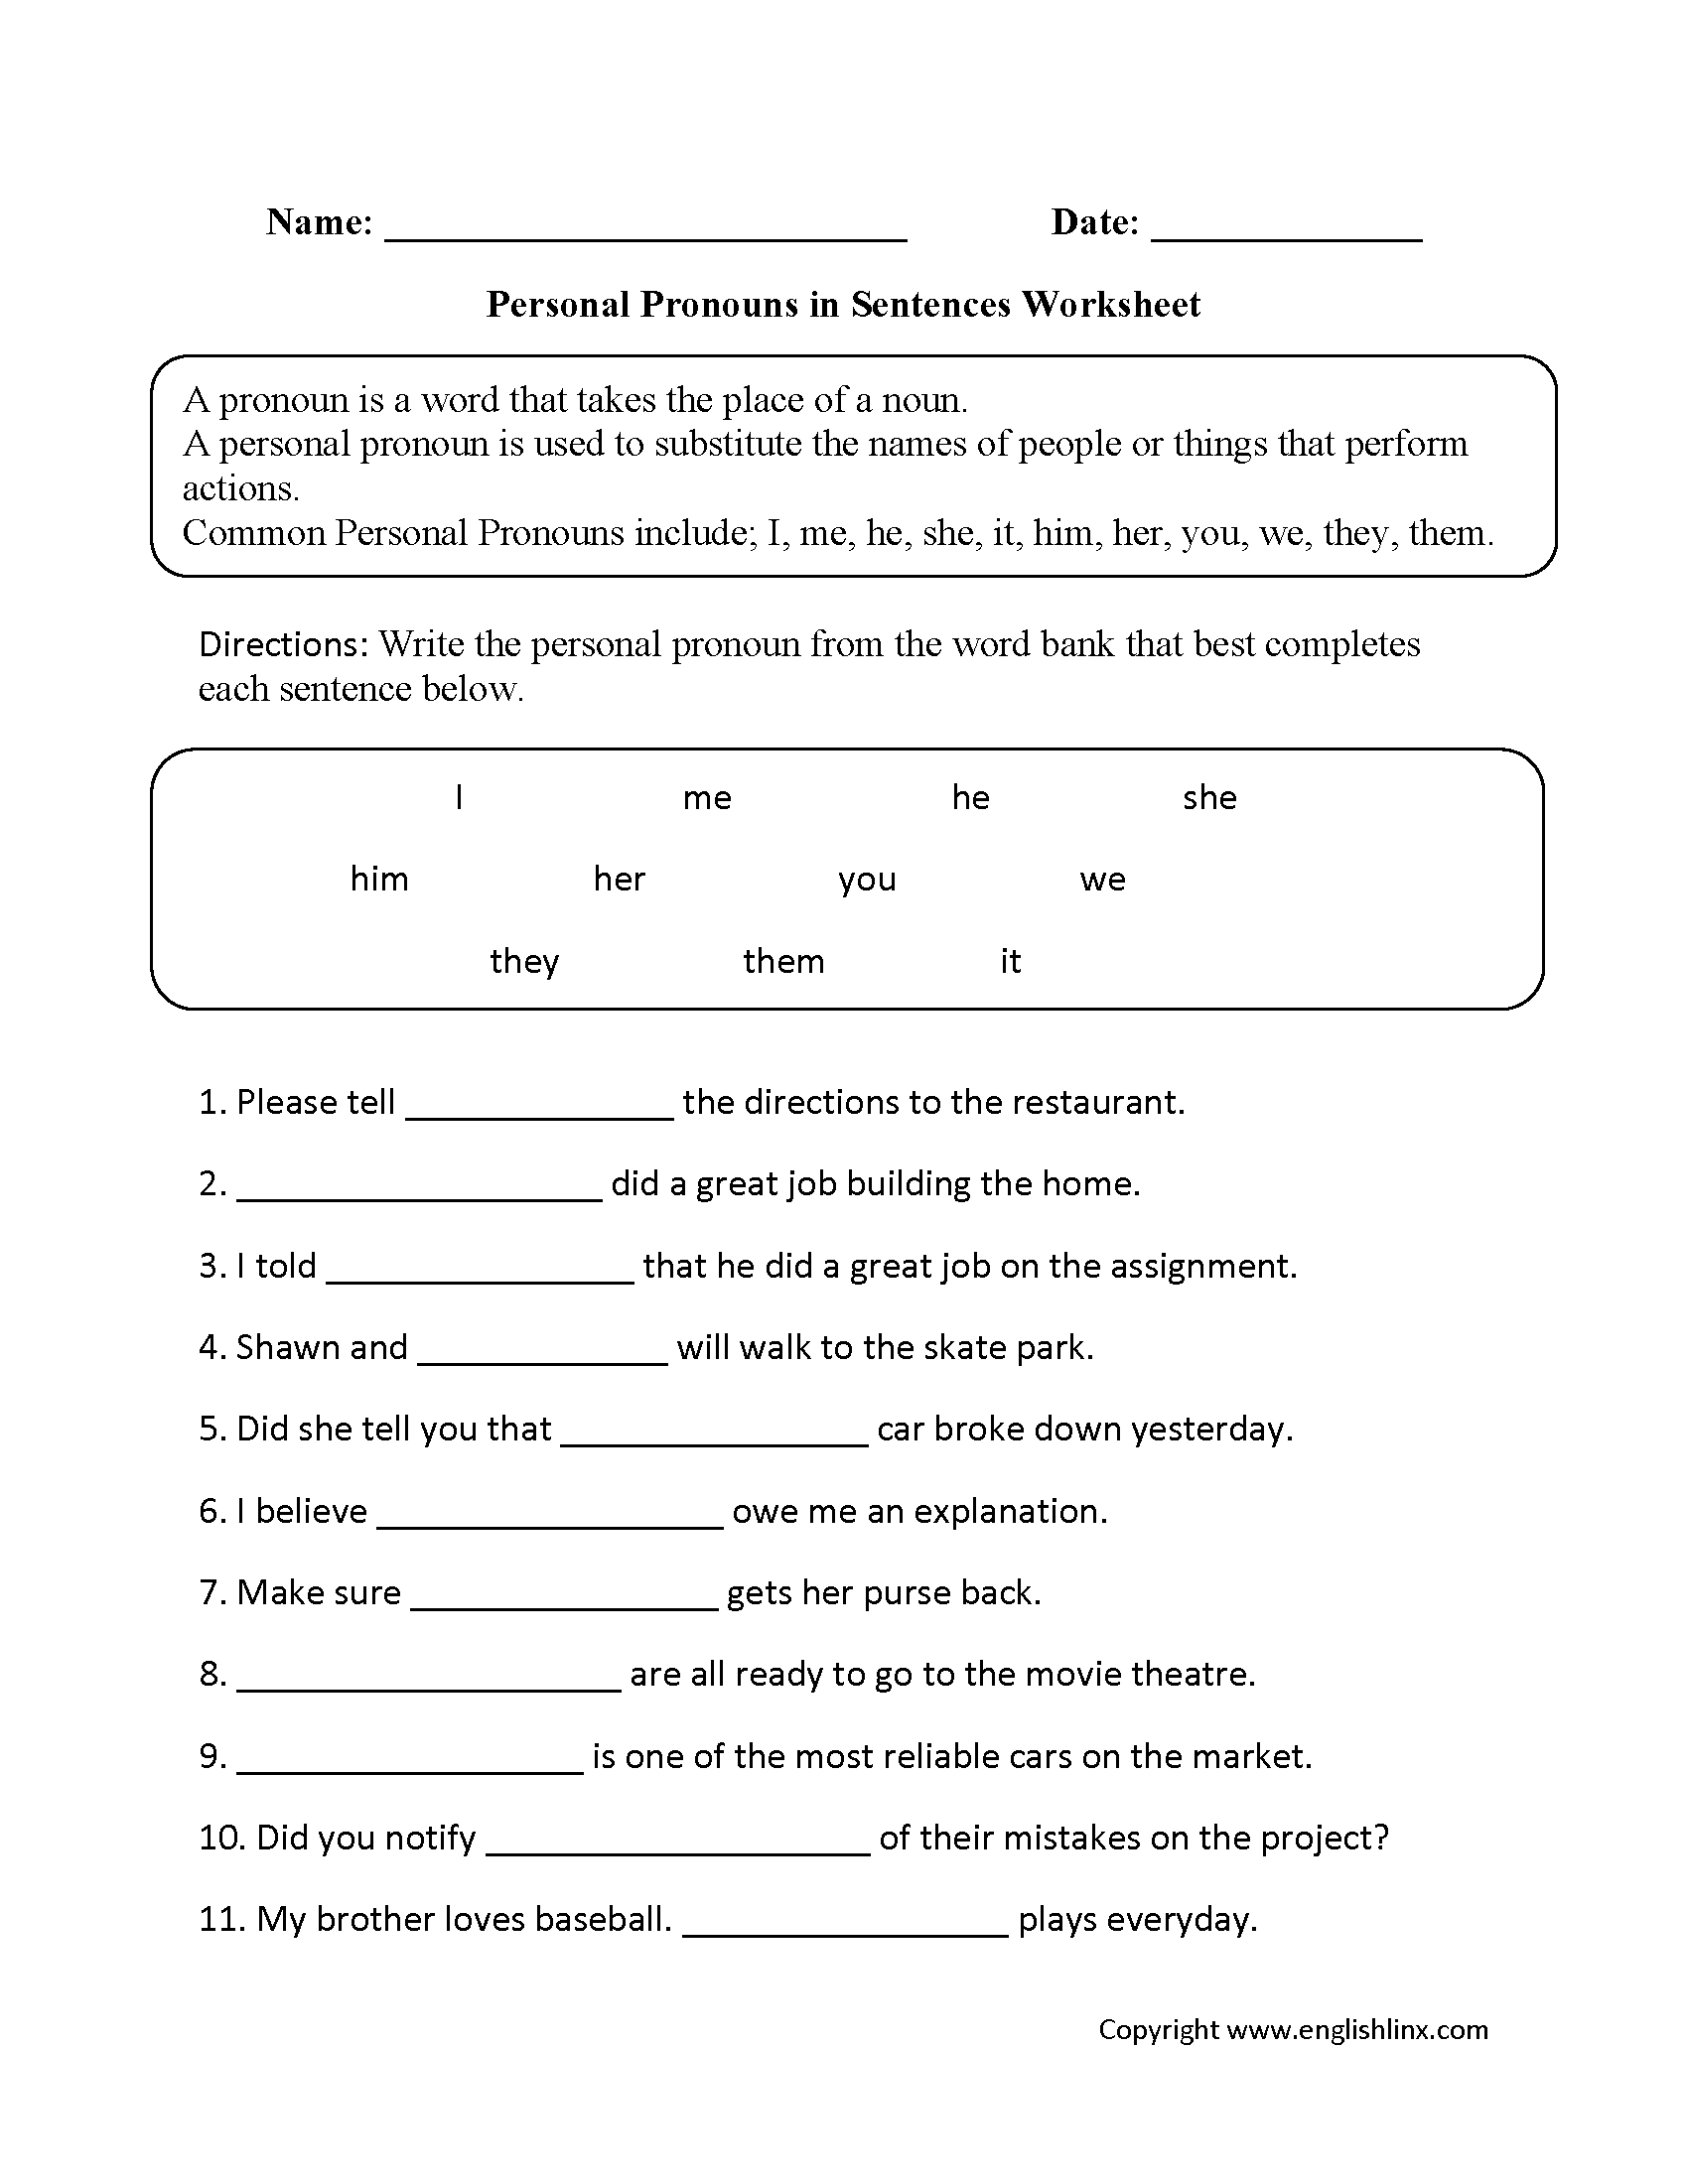 Personal Pronouns in Sentences Worksheets